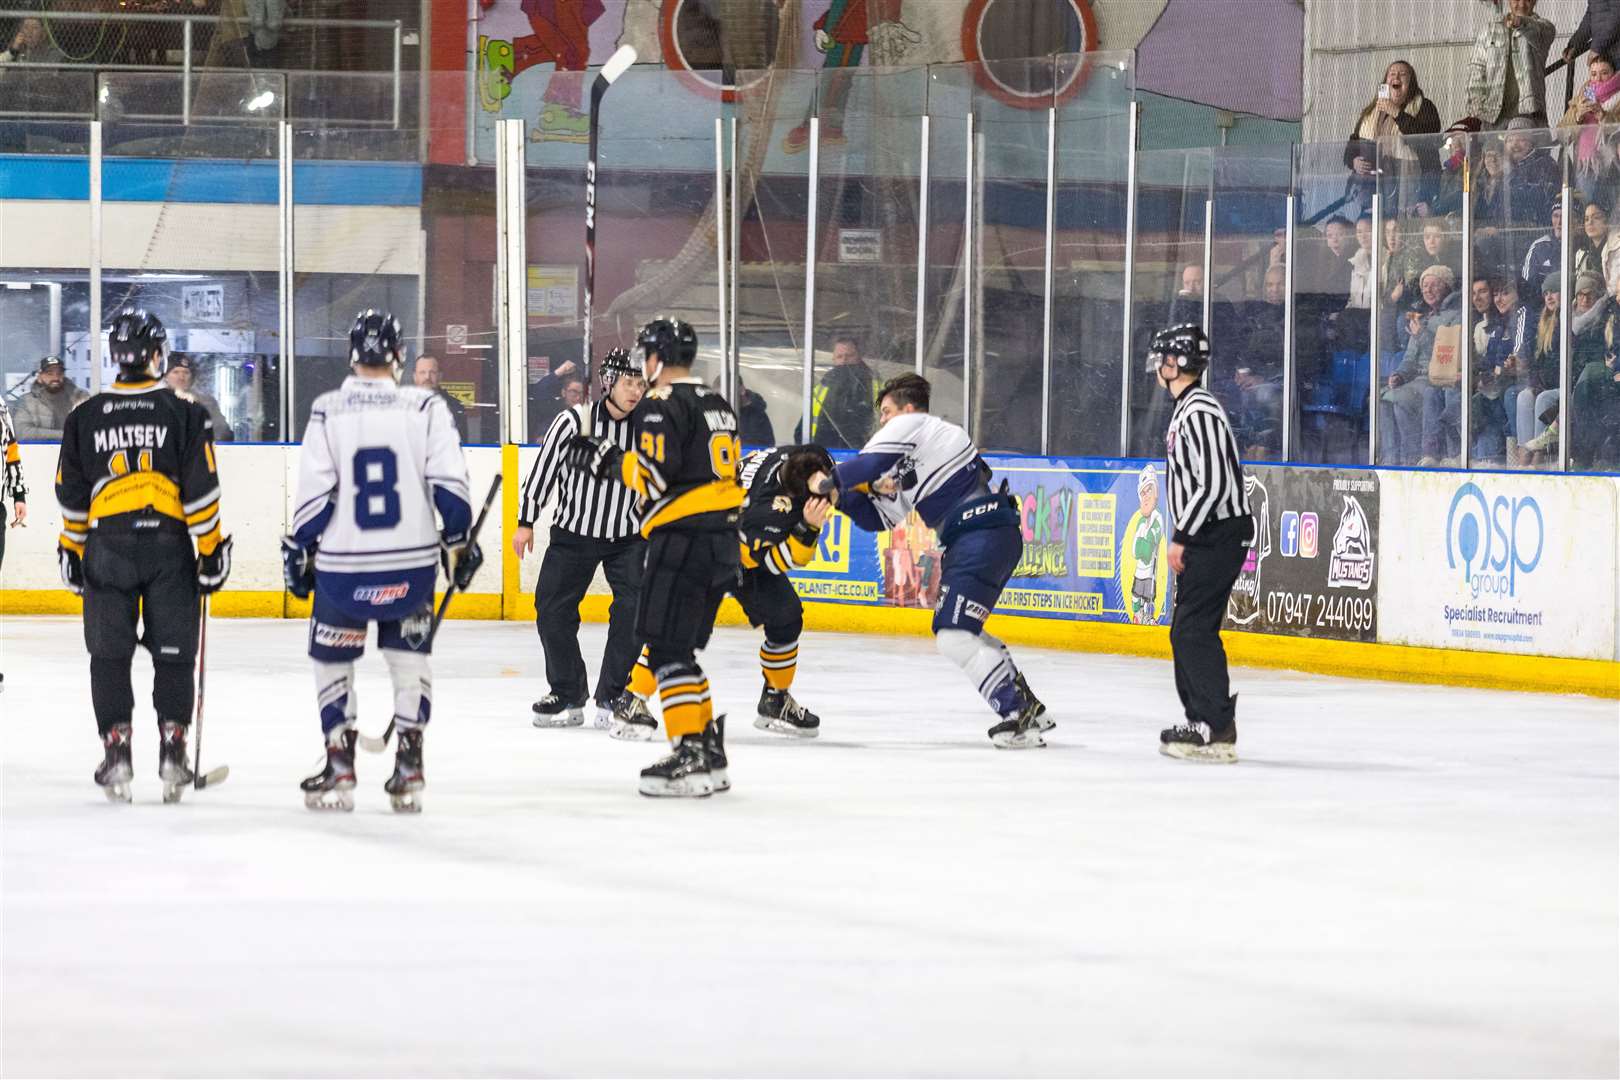 The gloves are off at Planet Ice as Invicta Dynamos take on Chelmsford Chieftains Picture: David Trevallion